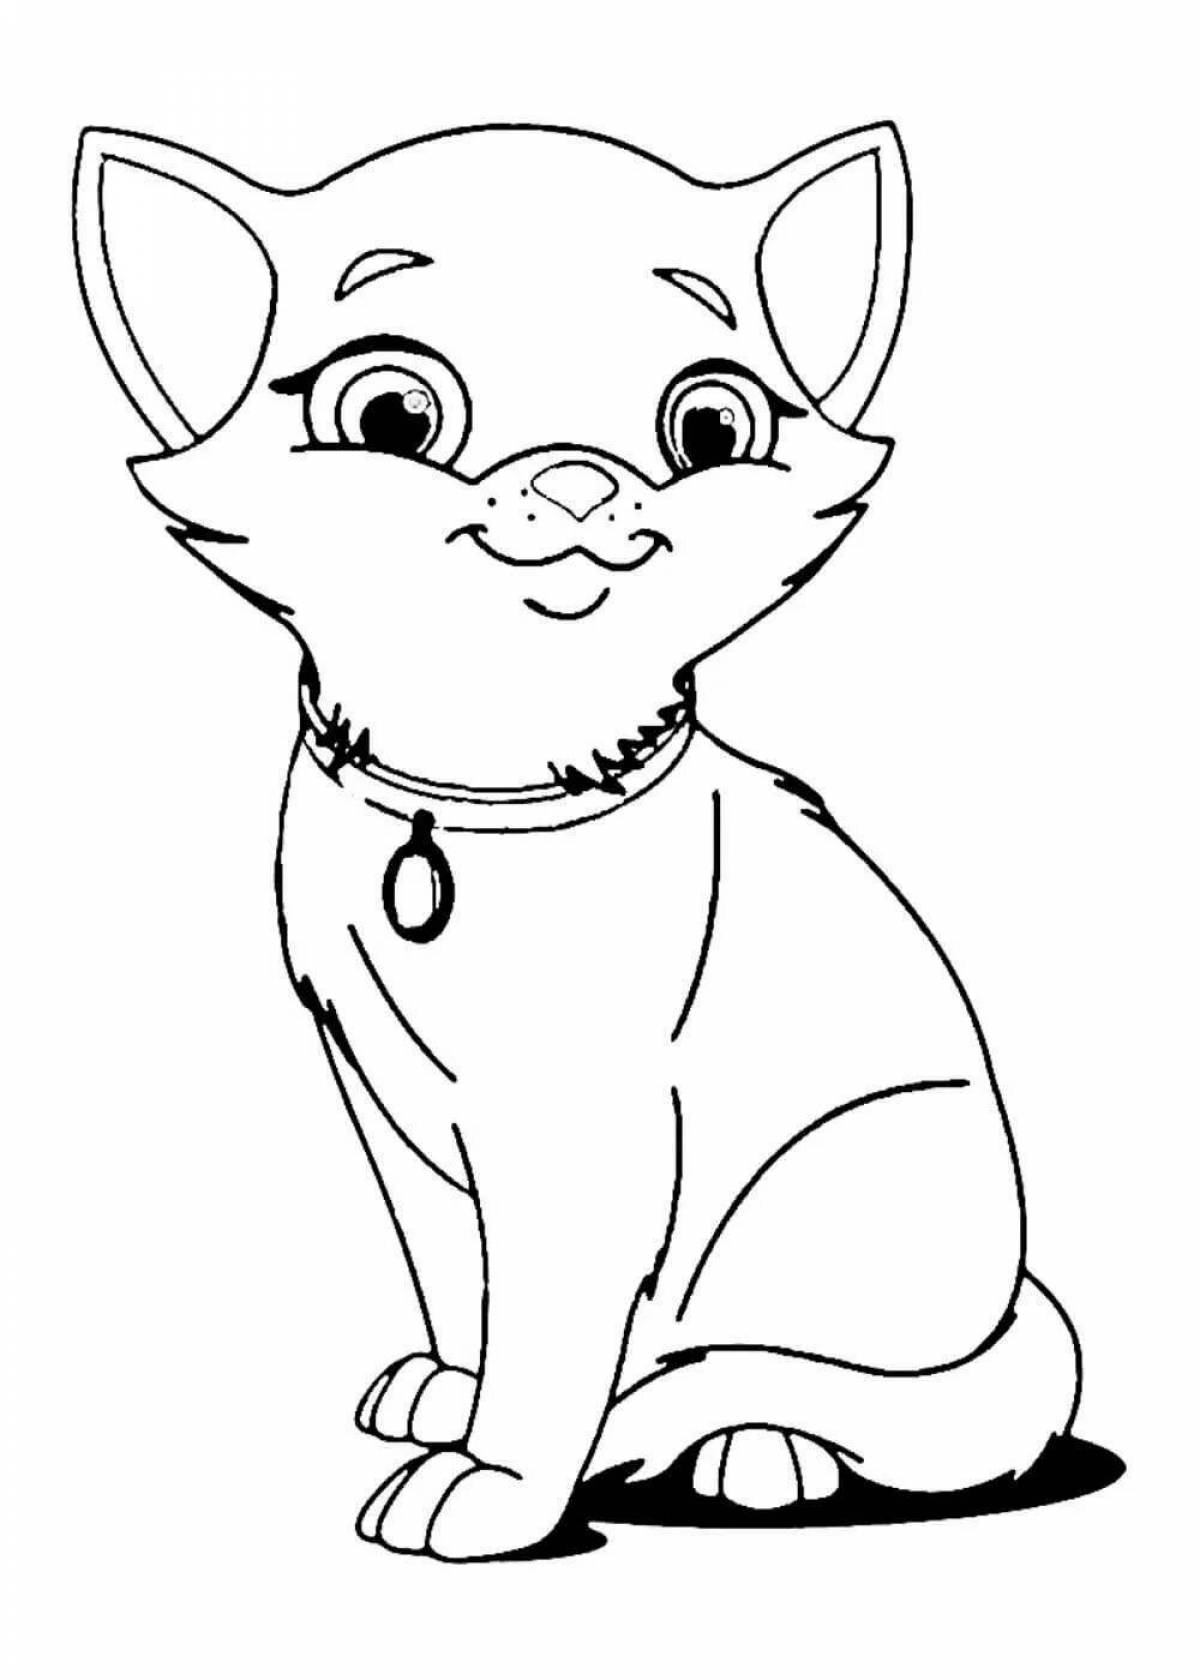 Coloring page energetic cat